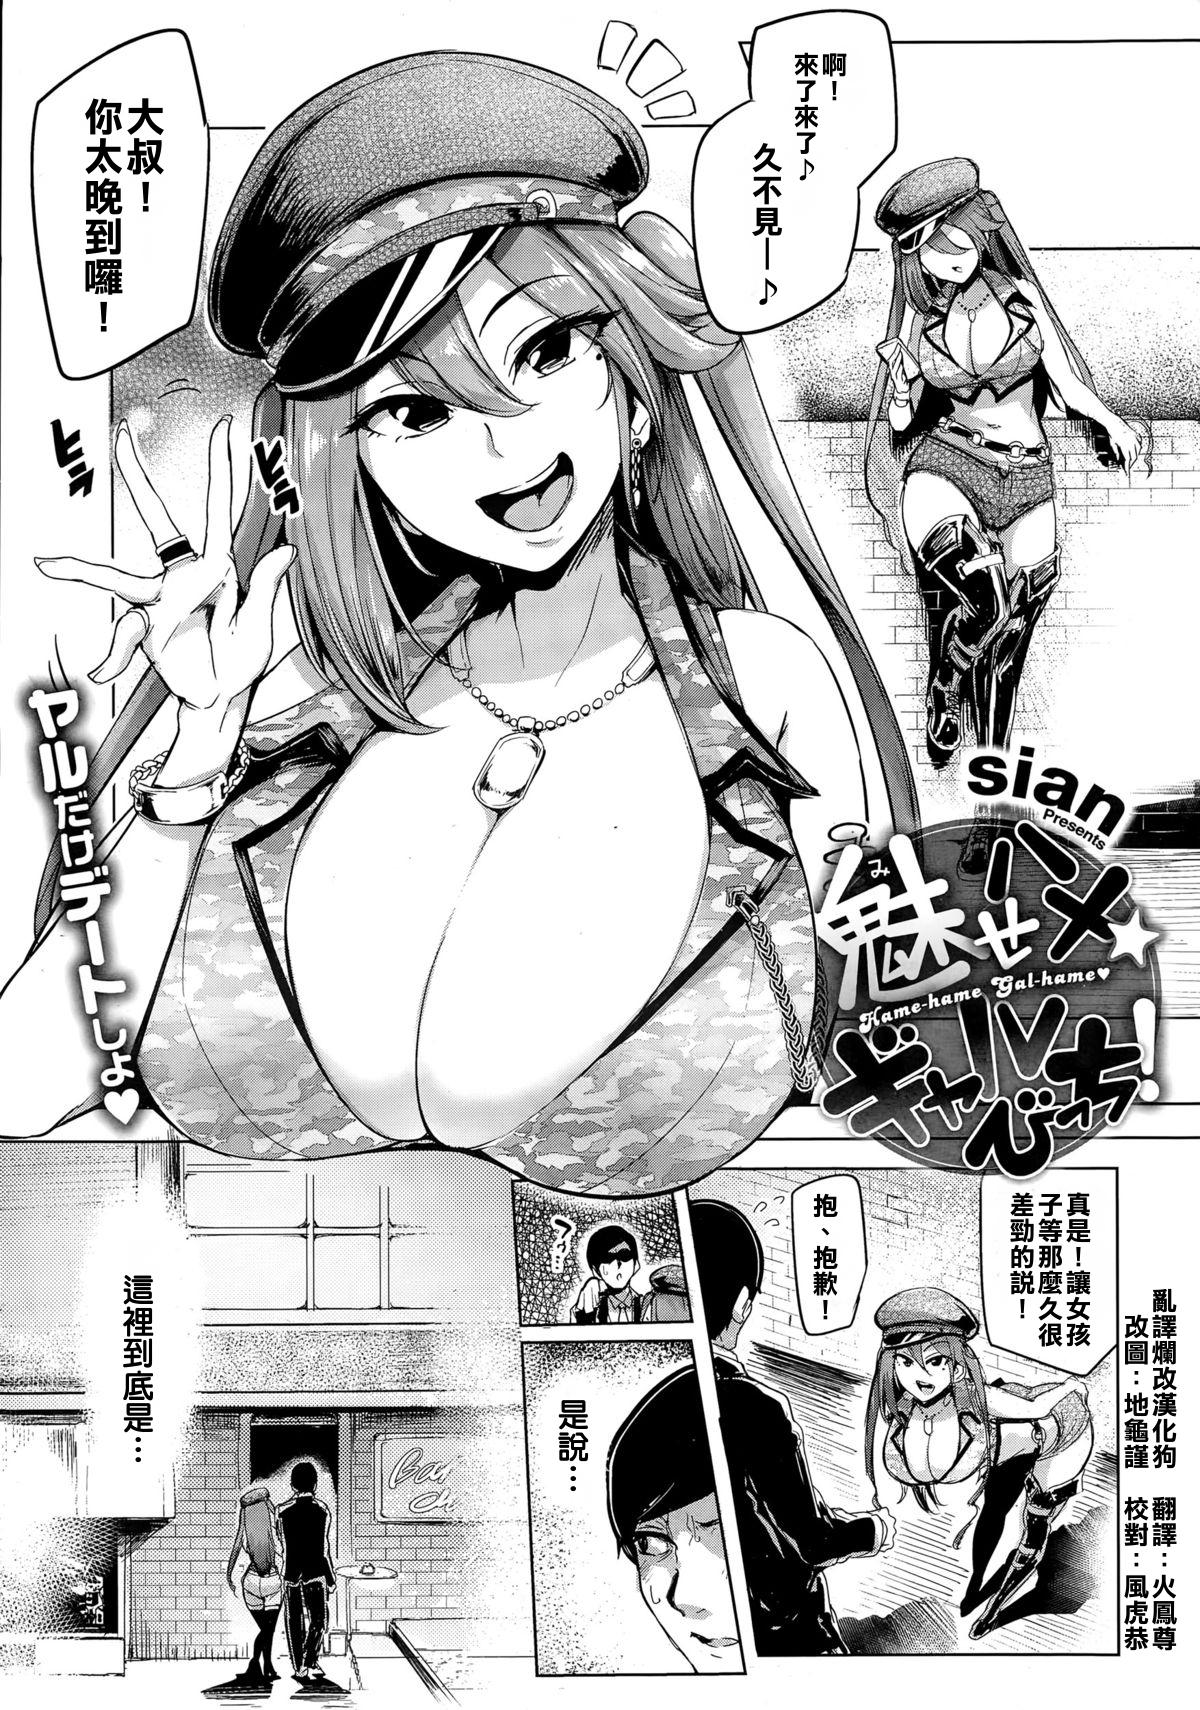 Trans Soku Hame Gal Bitch ! ＋ Mise Hame Gal Bitch ! | One-Night Stand with a Gyaru Slut! + Fucking a Gyaru Slut! + Gals Bitch After Oshiri Hen | Gyaru Slut! After Butt Edition Asiansex - Page 5